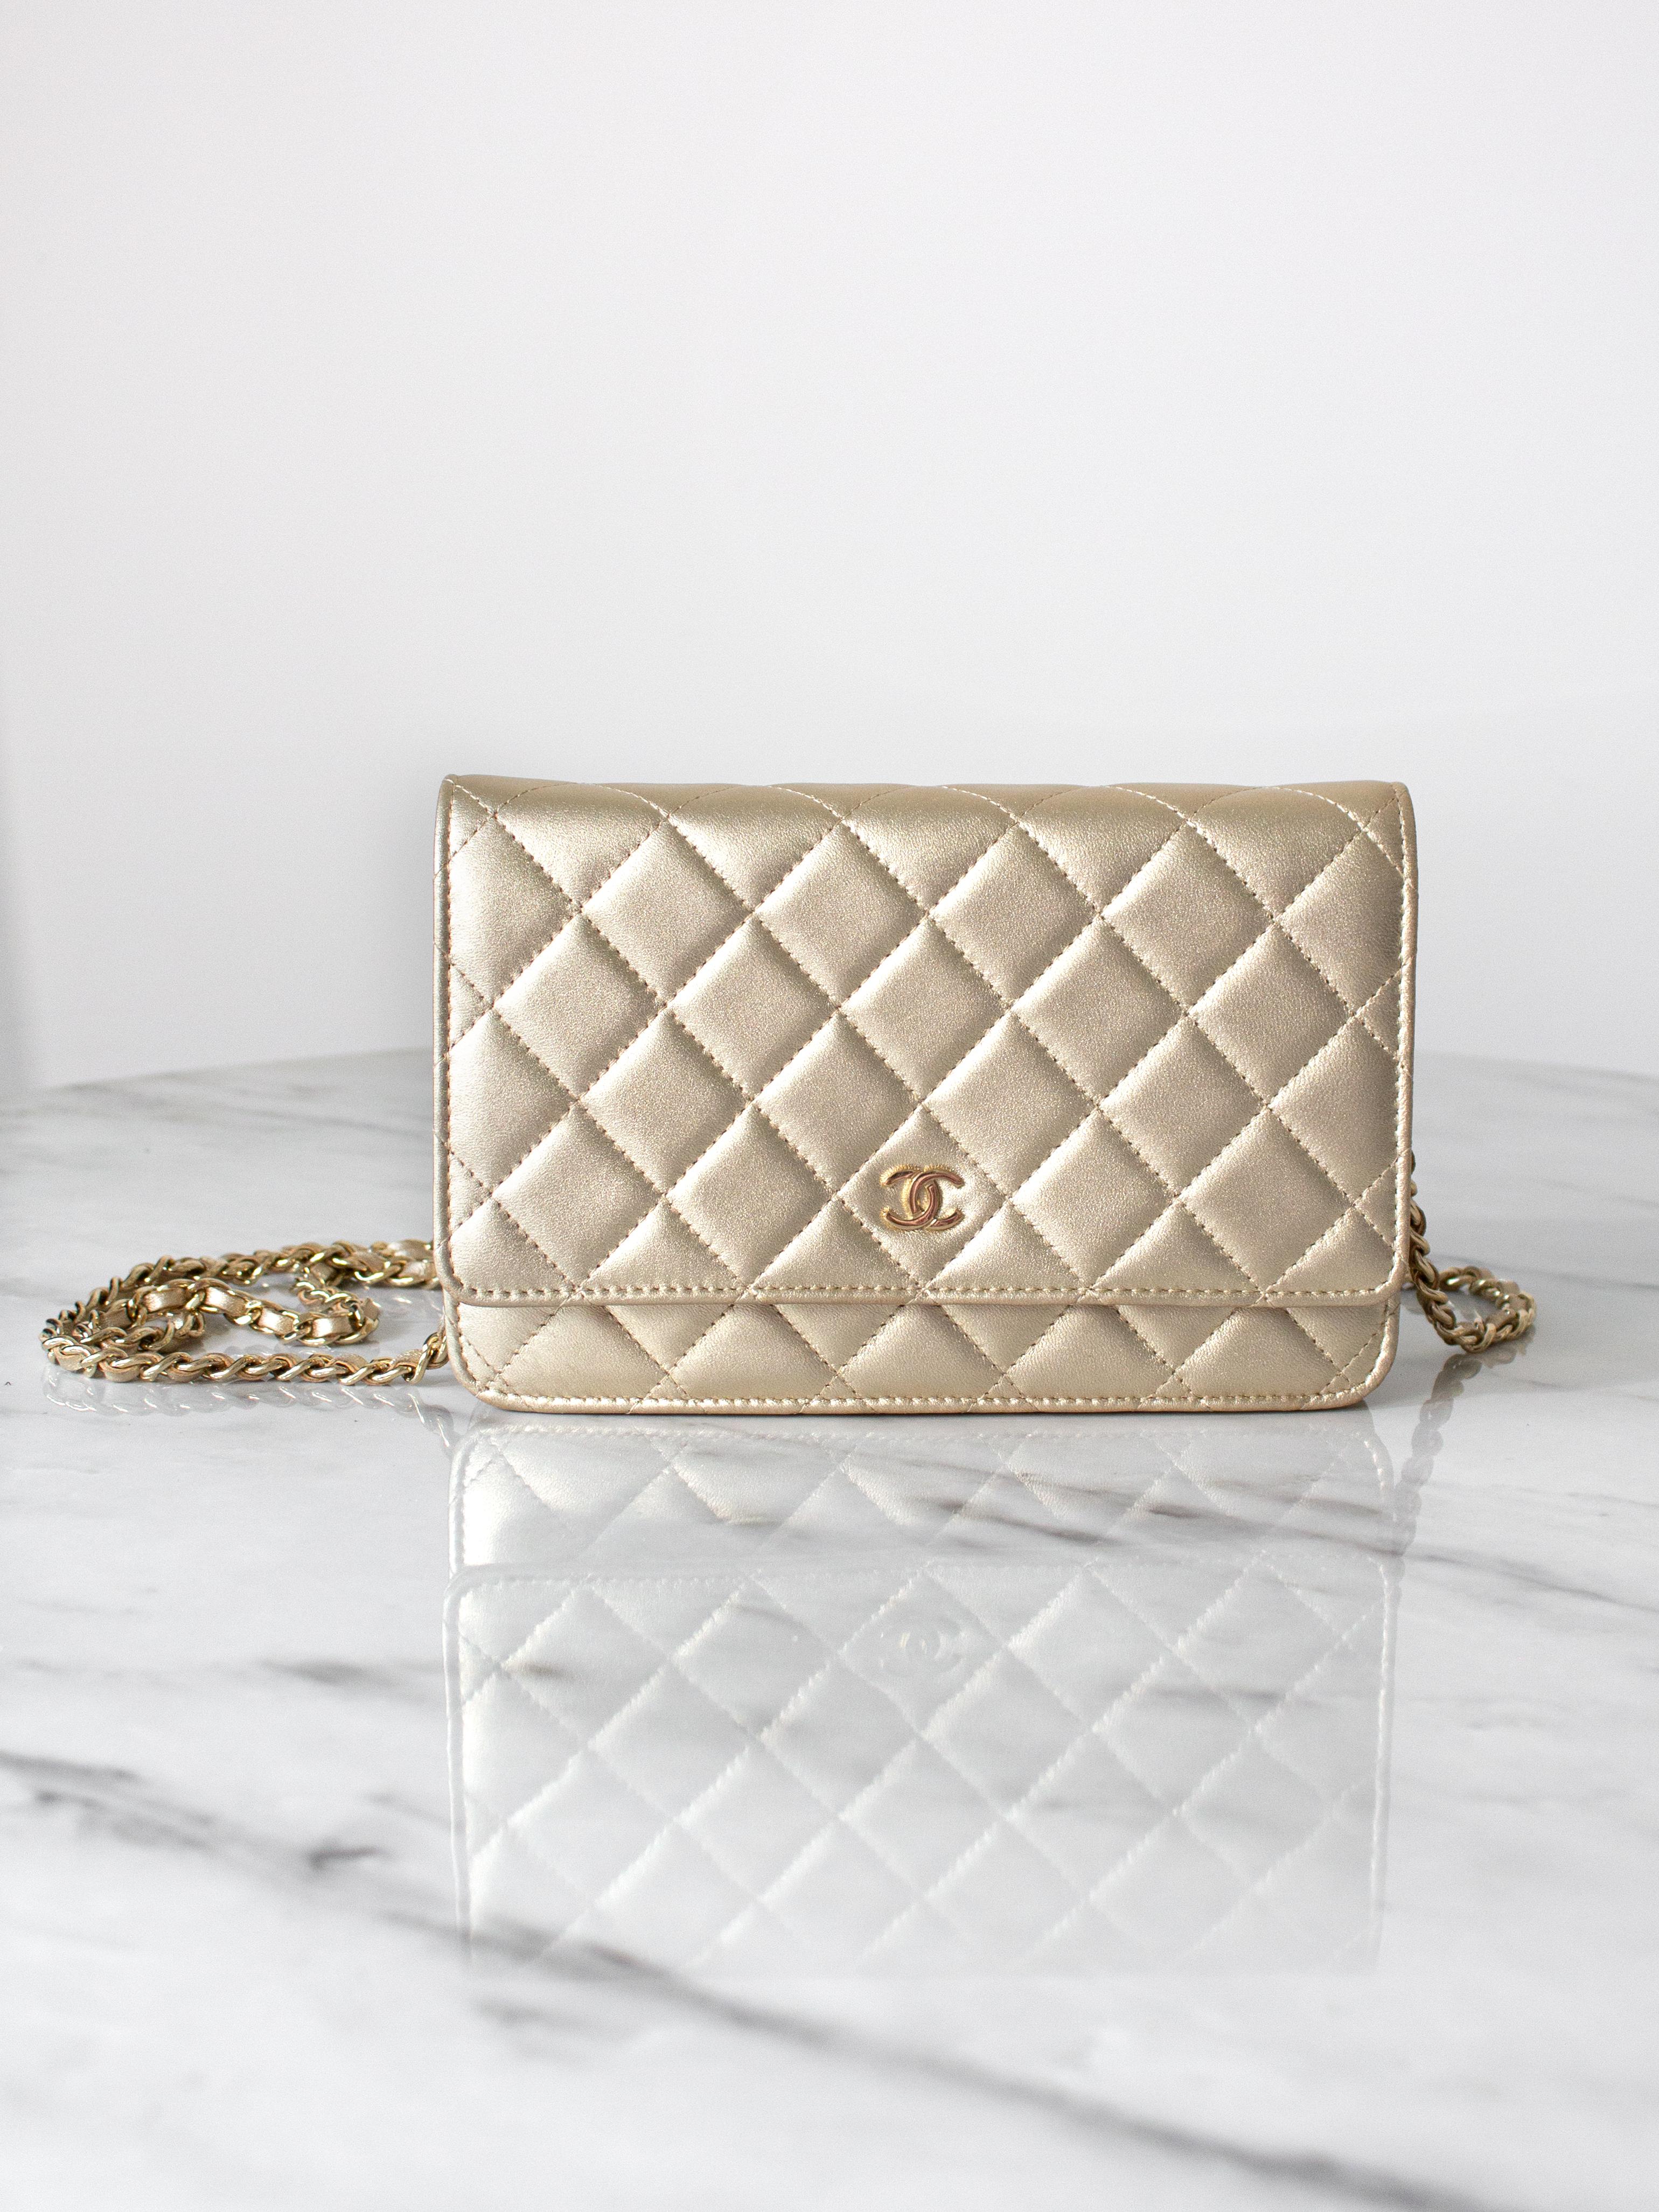 The Chanel classic Wallet on Chain in champagne gold lambskin leather with gold tone hardware. Its iconic quilting, adorned with a CC charm on the front flap and a discreet snap closure. The versatile design includes a half-moon rear pocket and an